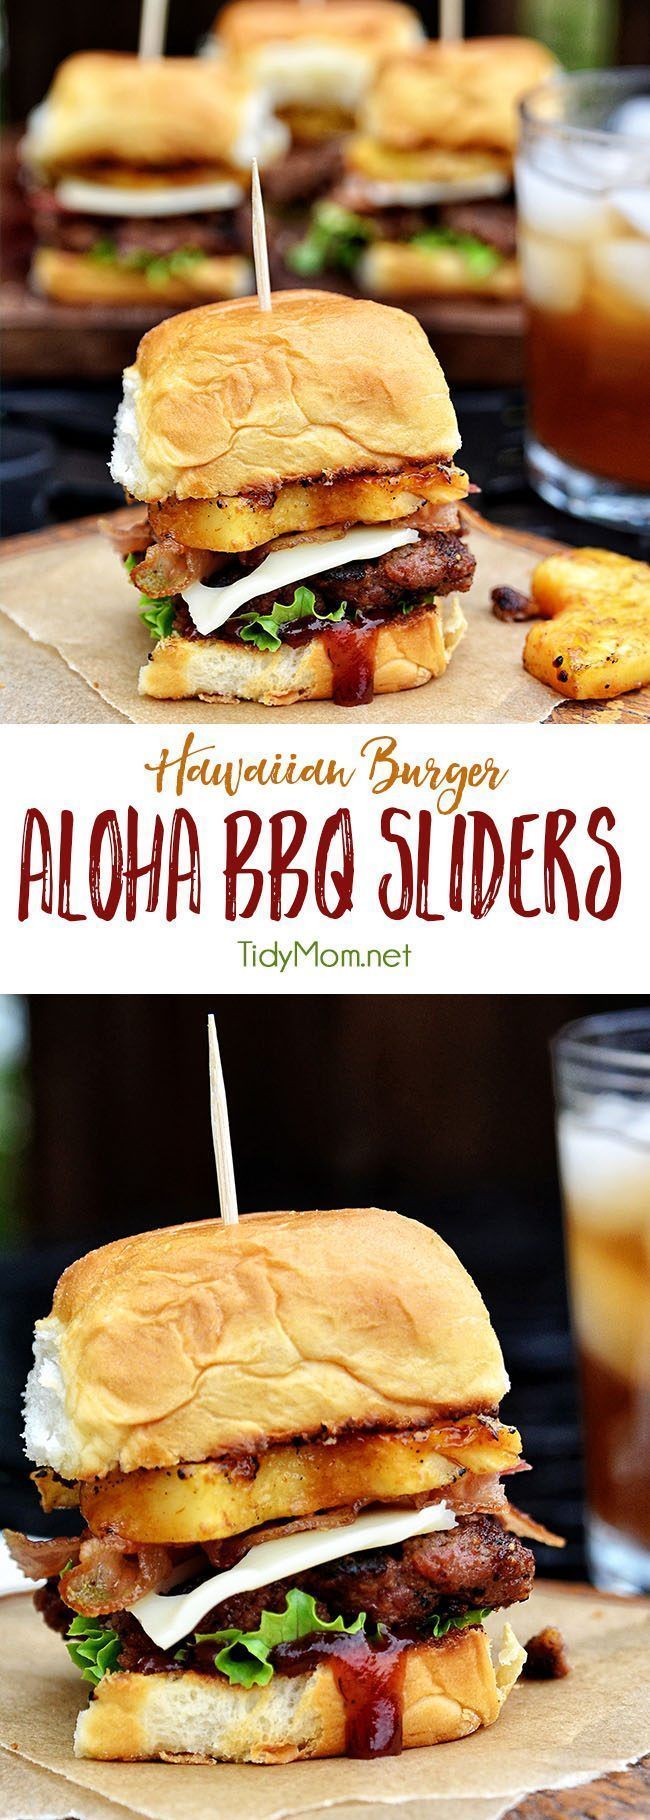 Fire up the grill for this Hawaiian burger recipe. Aloha BBQ Sliders are flavored with BBQ sauce, served on sweet rolls with